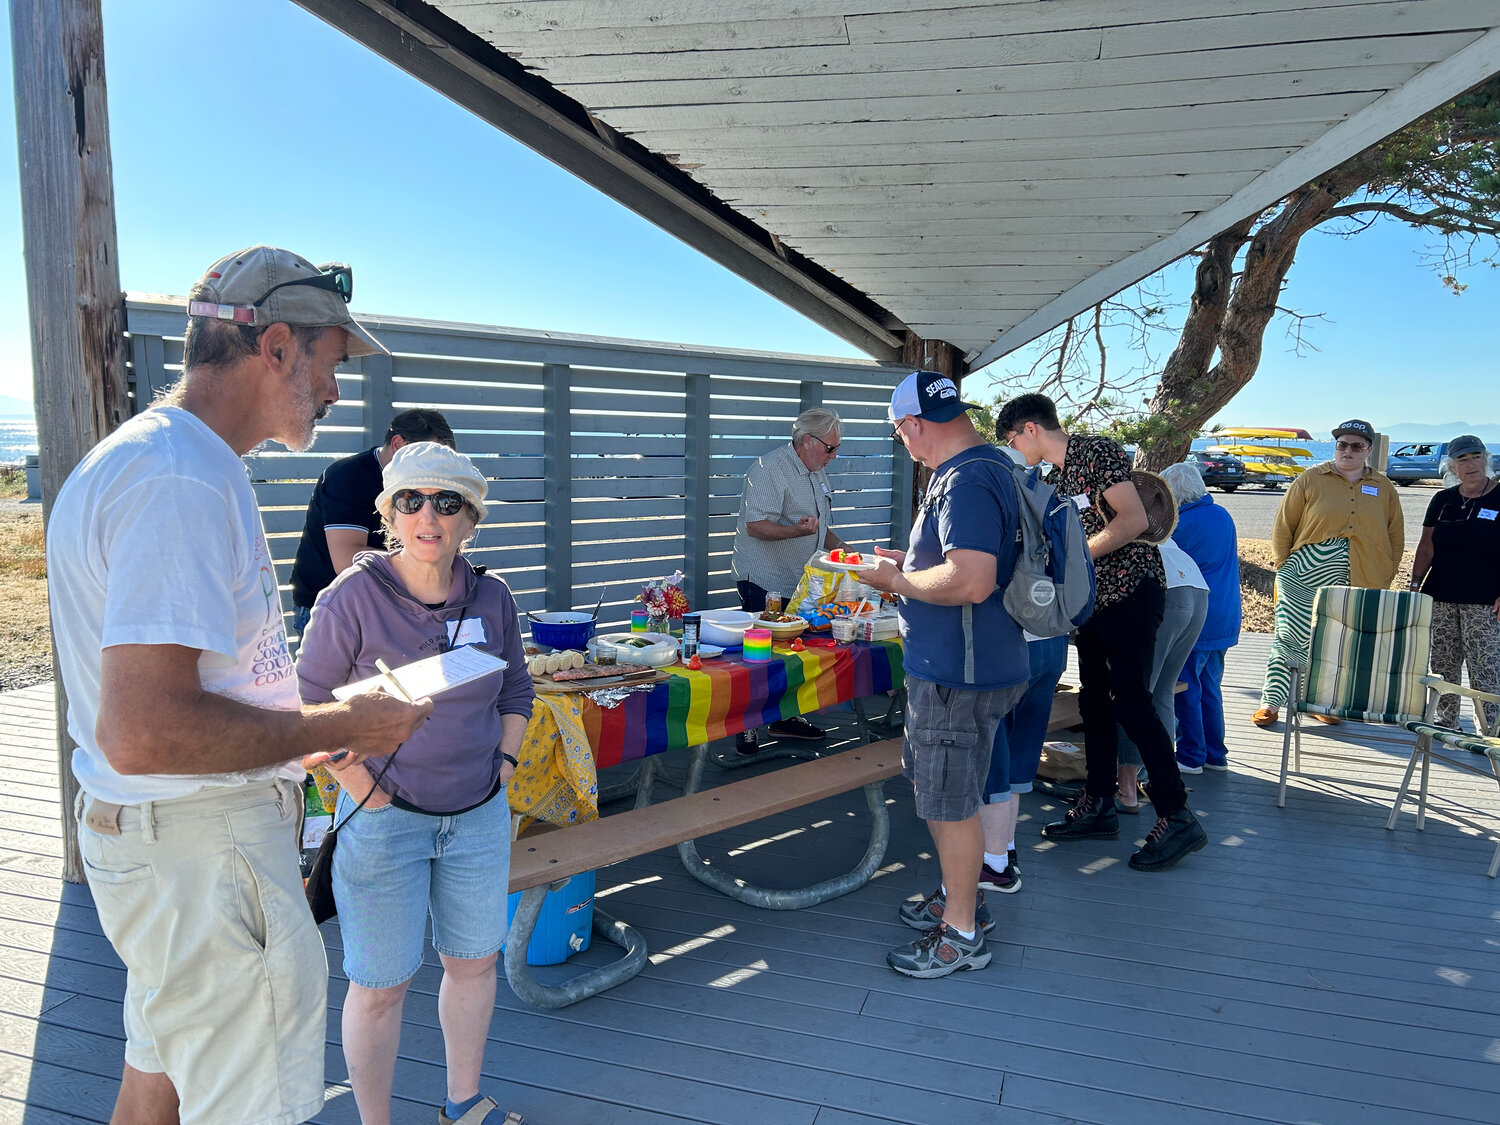 Friends and members of QUAAC met up for a potluck at Lighthouse Park August 4.